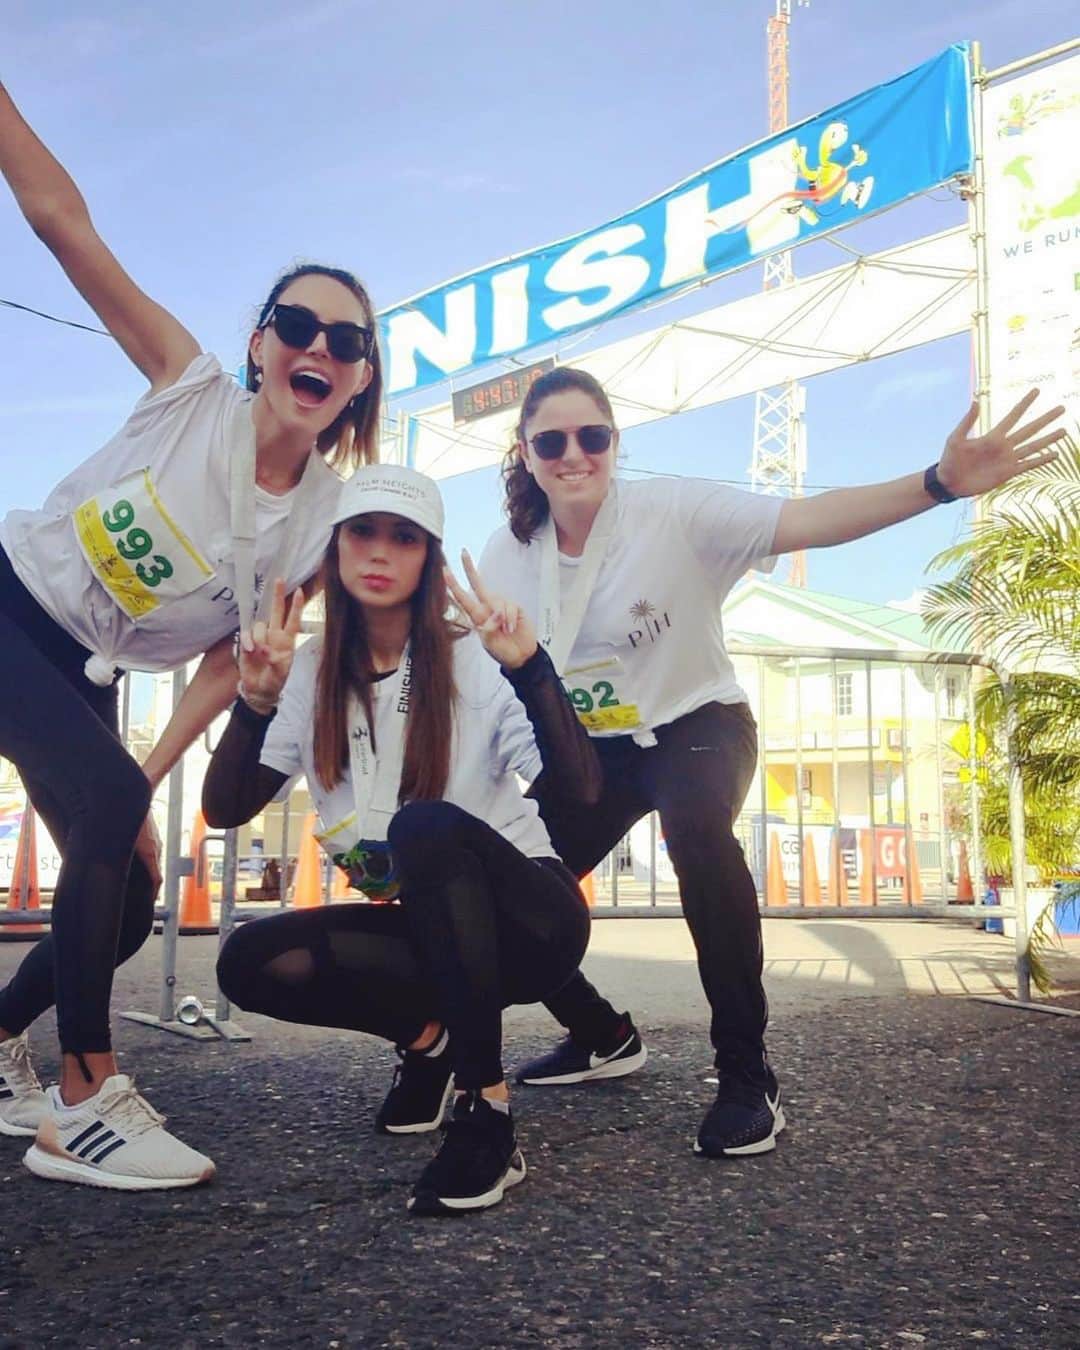 Elizabeth Chambers Hammerのインスタグラム：「I’m not a runner and do not marathon, but on Sunday, we did the #CaymanMarathon to raise funds for families who are unable to pay tuition for the remainder of the year due to halted tourism on island. Thank you to all who gave and to our largest sponsors, AHF (@hammer5191), @palmheightsgc and @palmheightsathletics. Because of you, 10 West Bay families will be able to finish their school year without interruption.  @tjy___lo @jojordan10, you’re the best run/walk/photo partners a girl could have.  ❤️ If you would like to help local families who are struggling during this time, please click the #OpenPalm link in bio. ❤️」